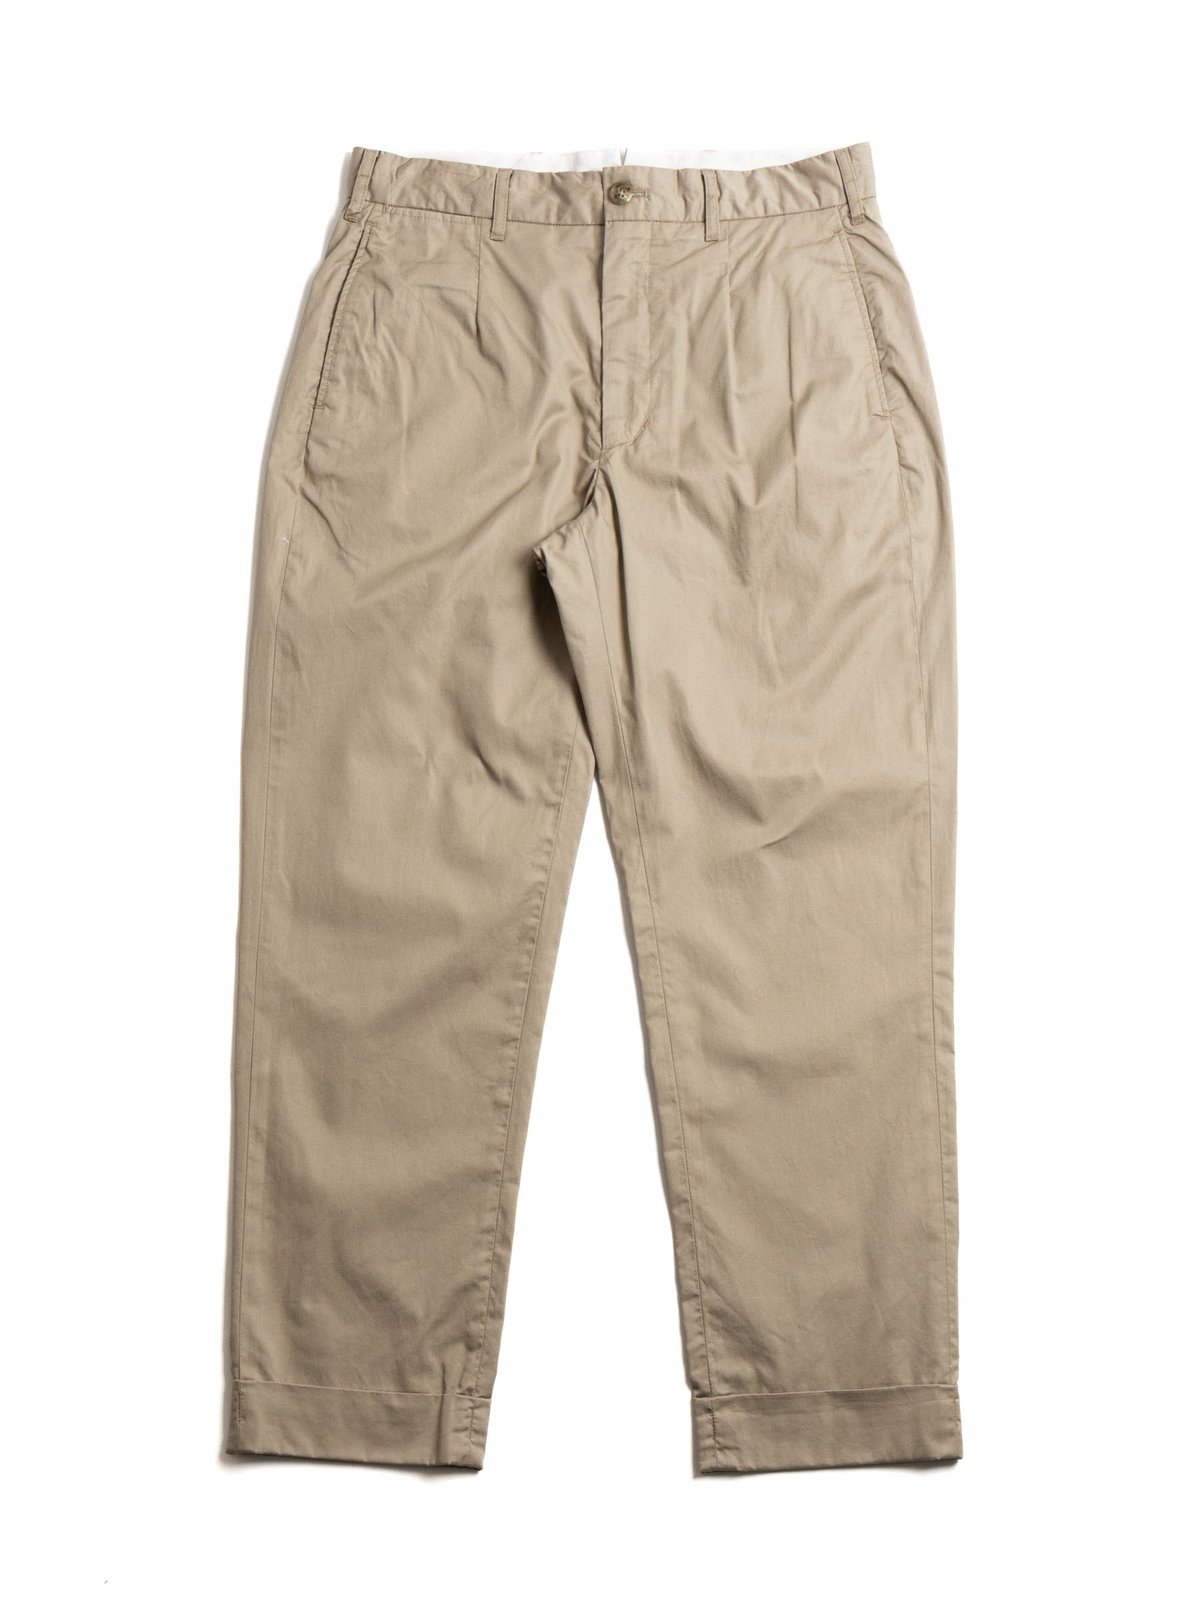 ANDOVER PANT KHAKI HIGH COUNT TWILL - Image 1